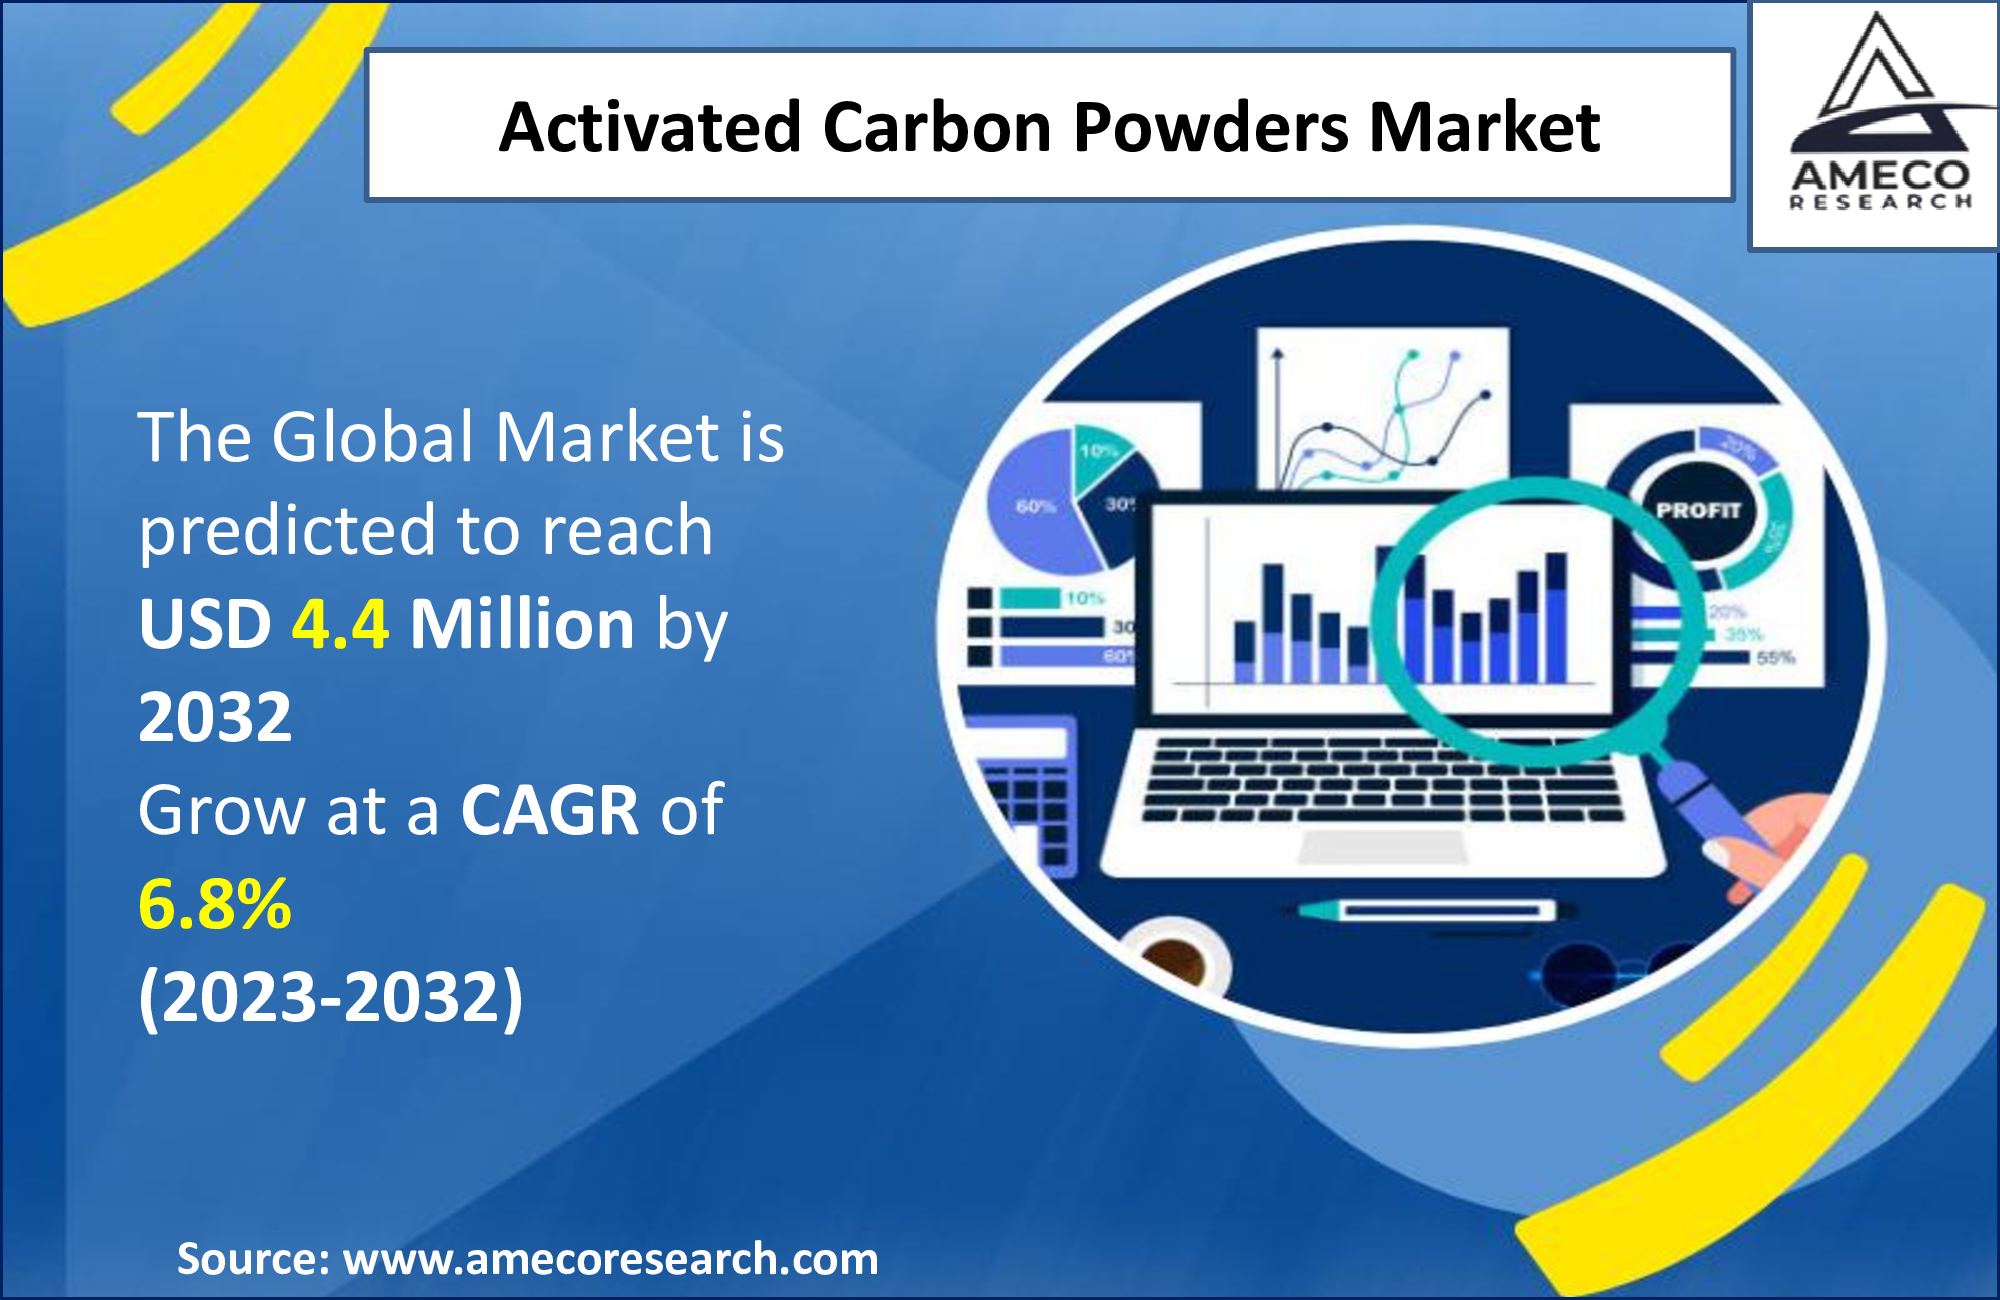 Activated Carbon Powders Market